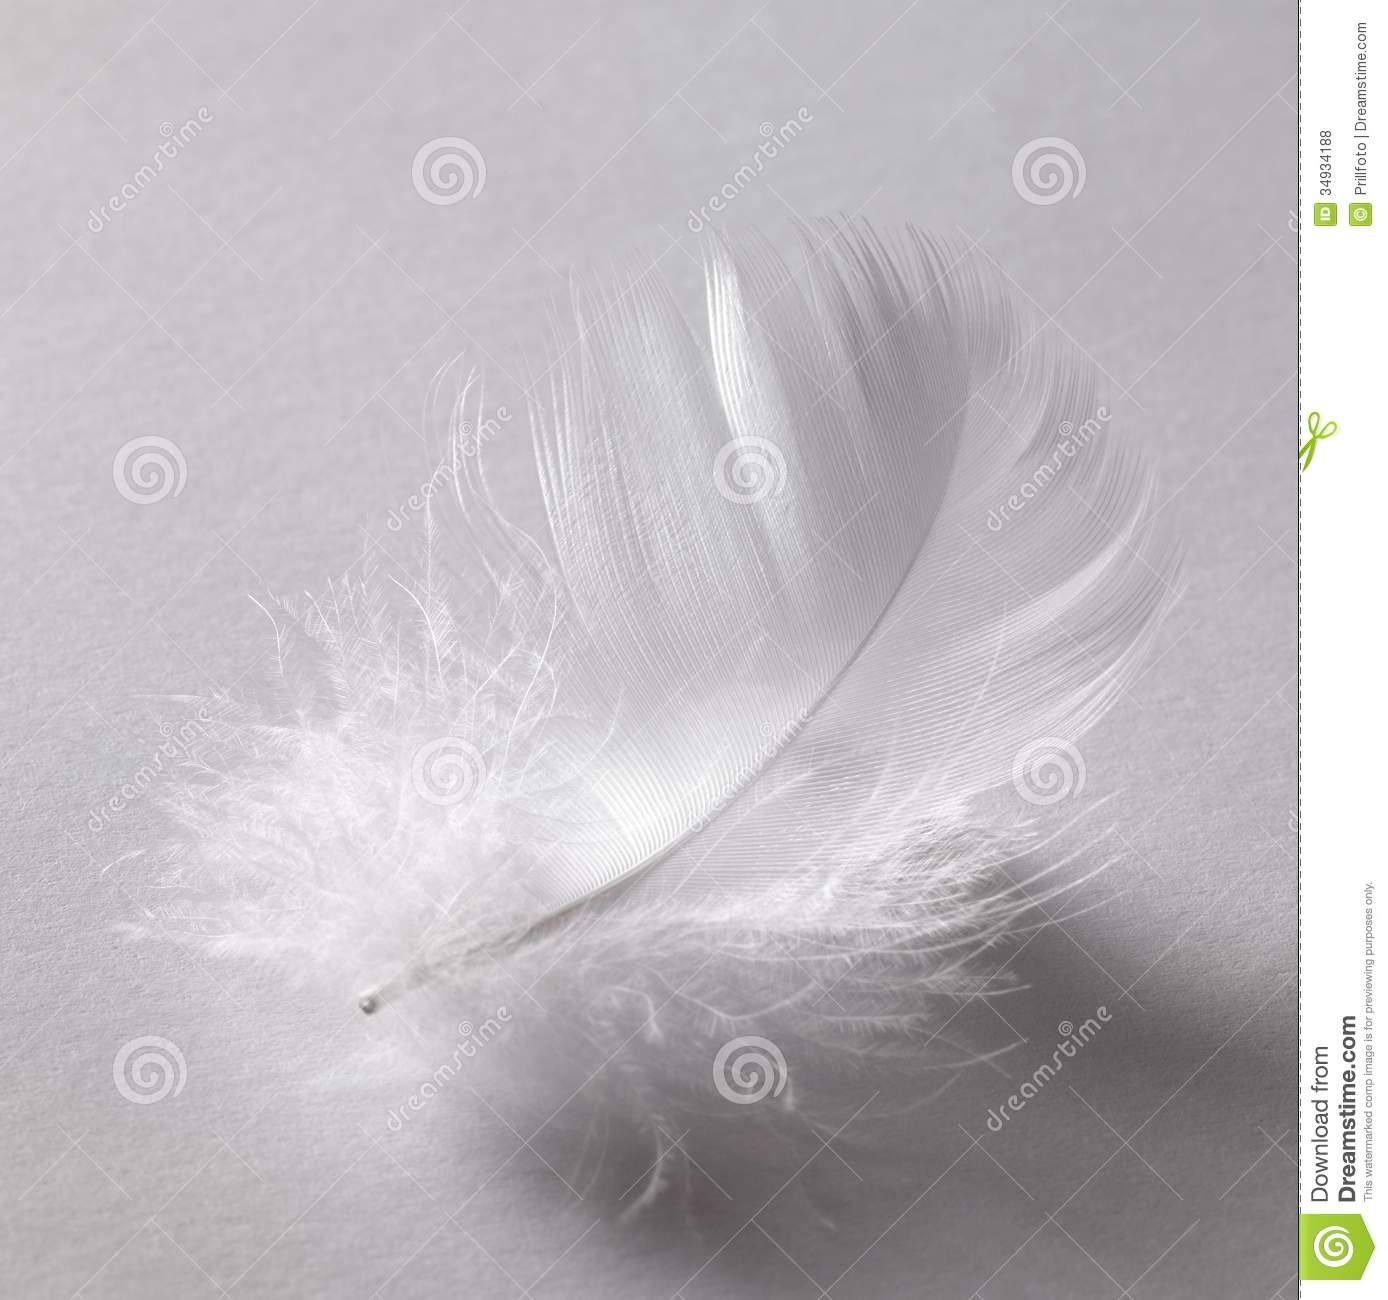 Studio Photography Of A White Fluffy Down Feather In Grey Back 